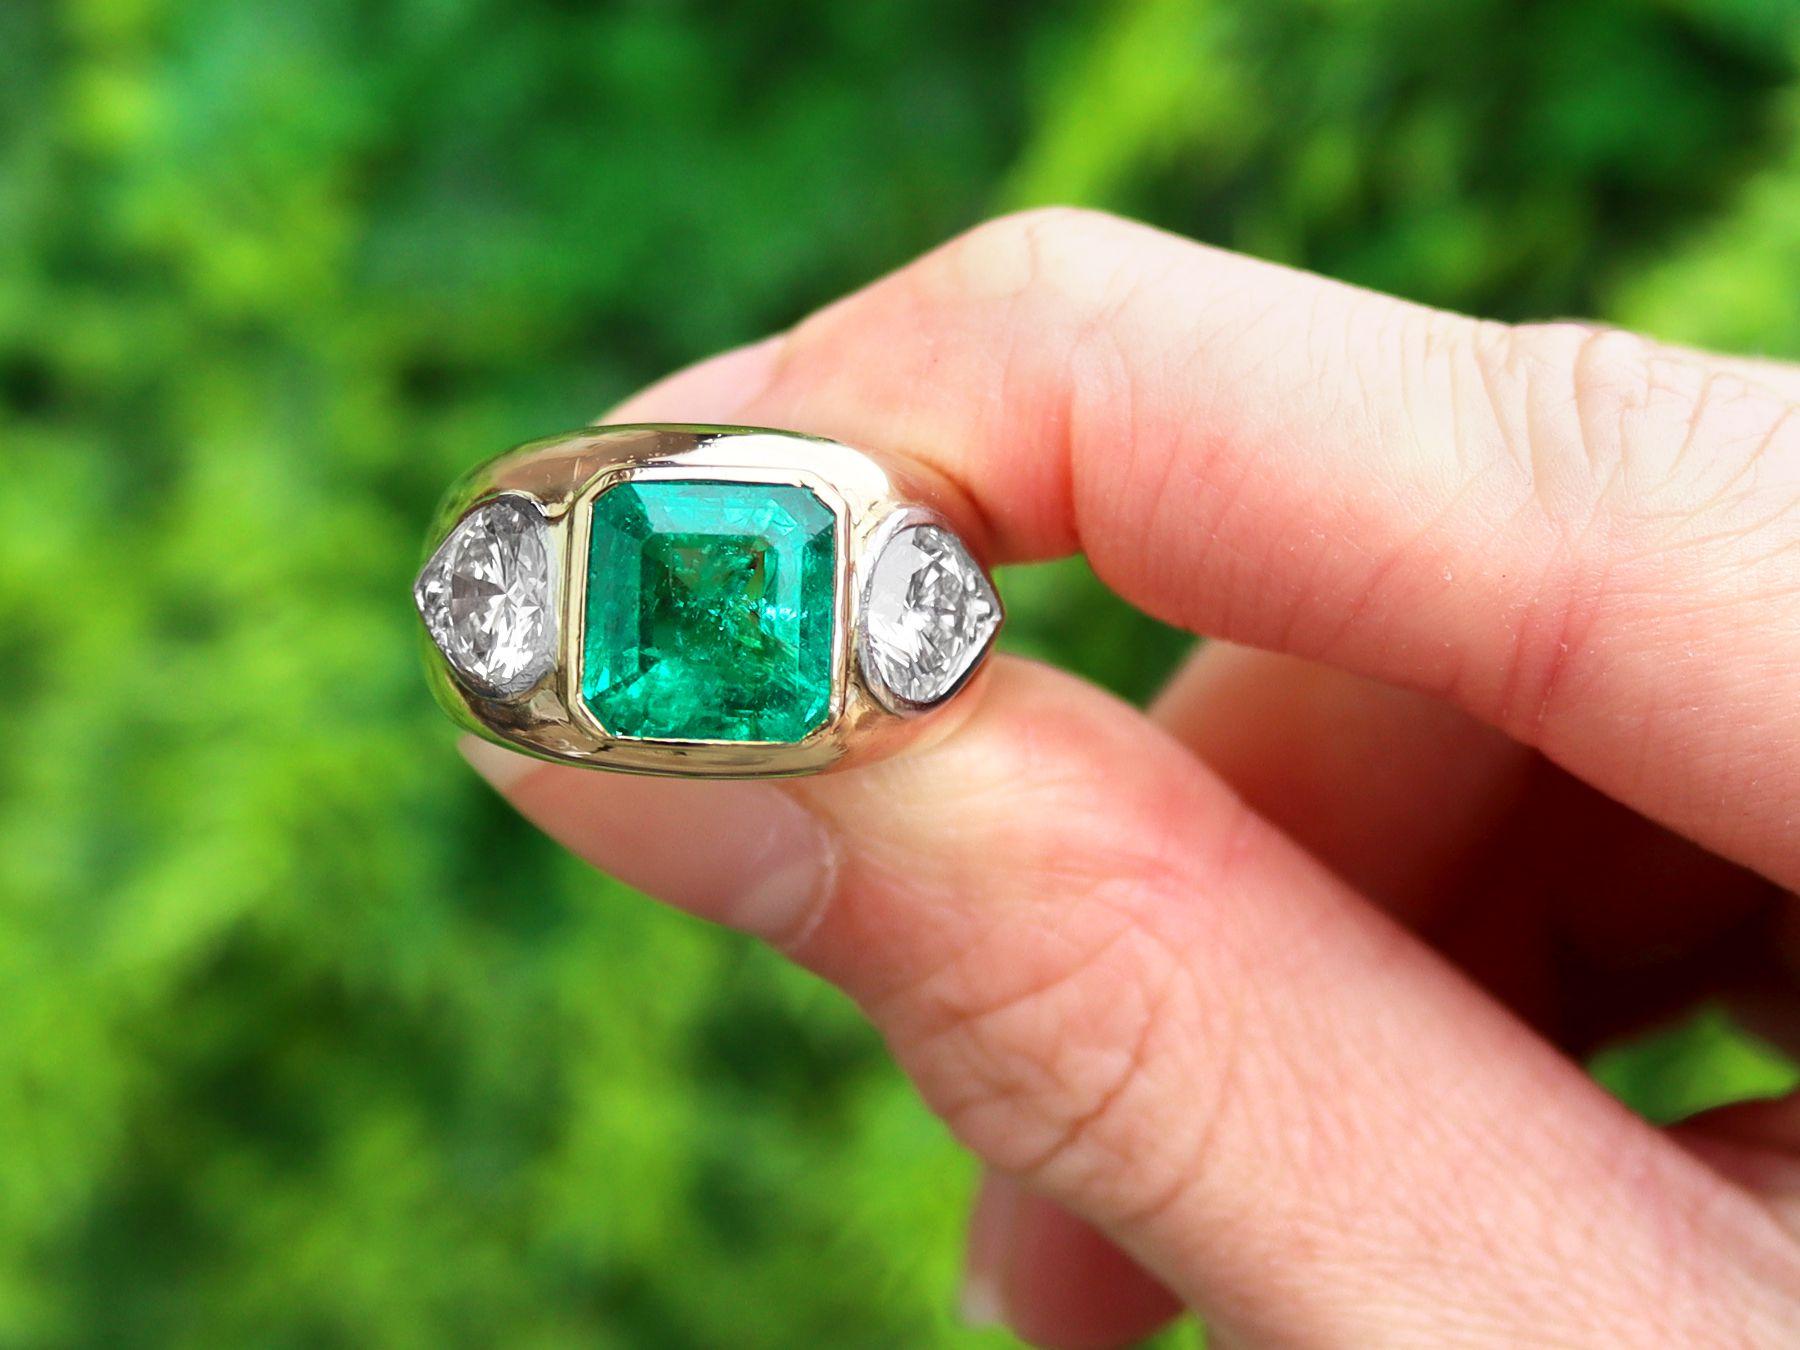 A stunning, fine and impressive vintage French 3.78 carat Colombian emerald and 2.18 carat diamond, 18 carat yellow gold and platinum set dress ring; part of our diverse diamond jewellery and estate jewelry collections

This stunning, fine and